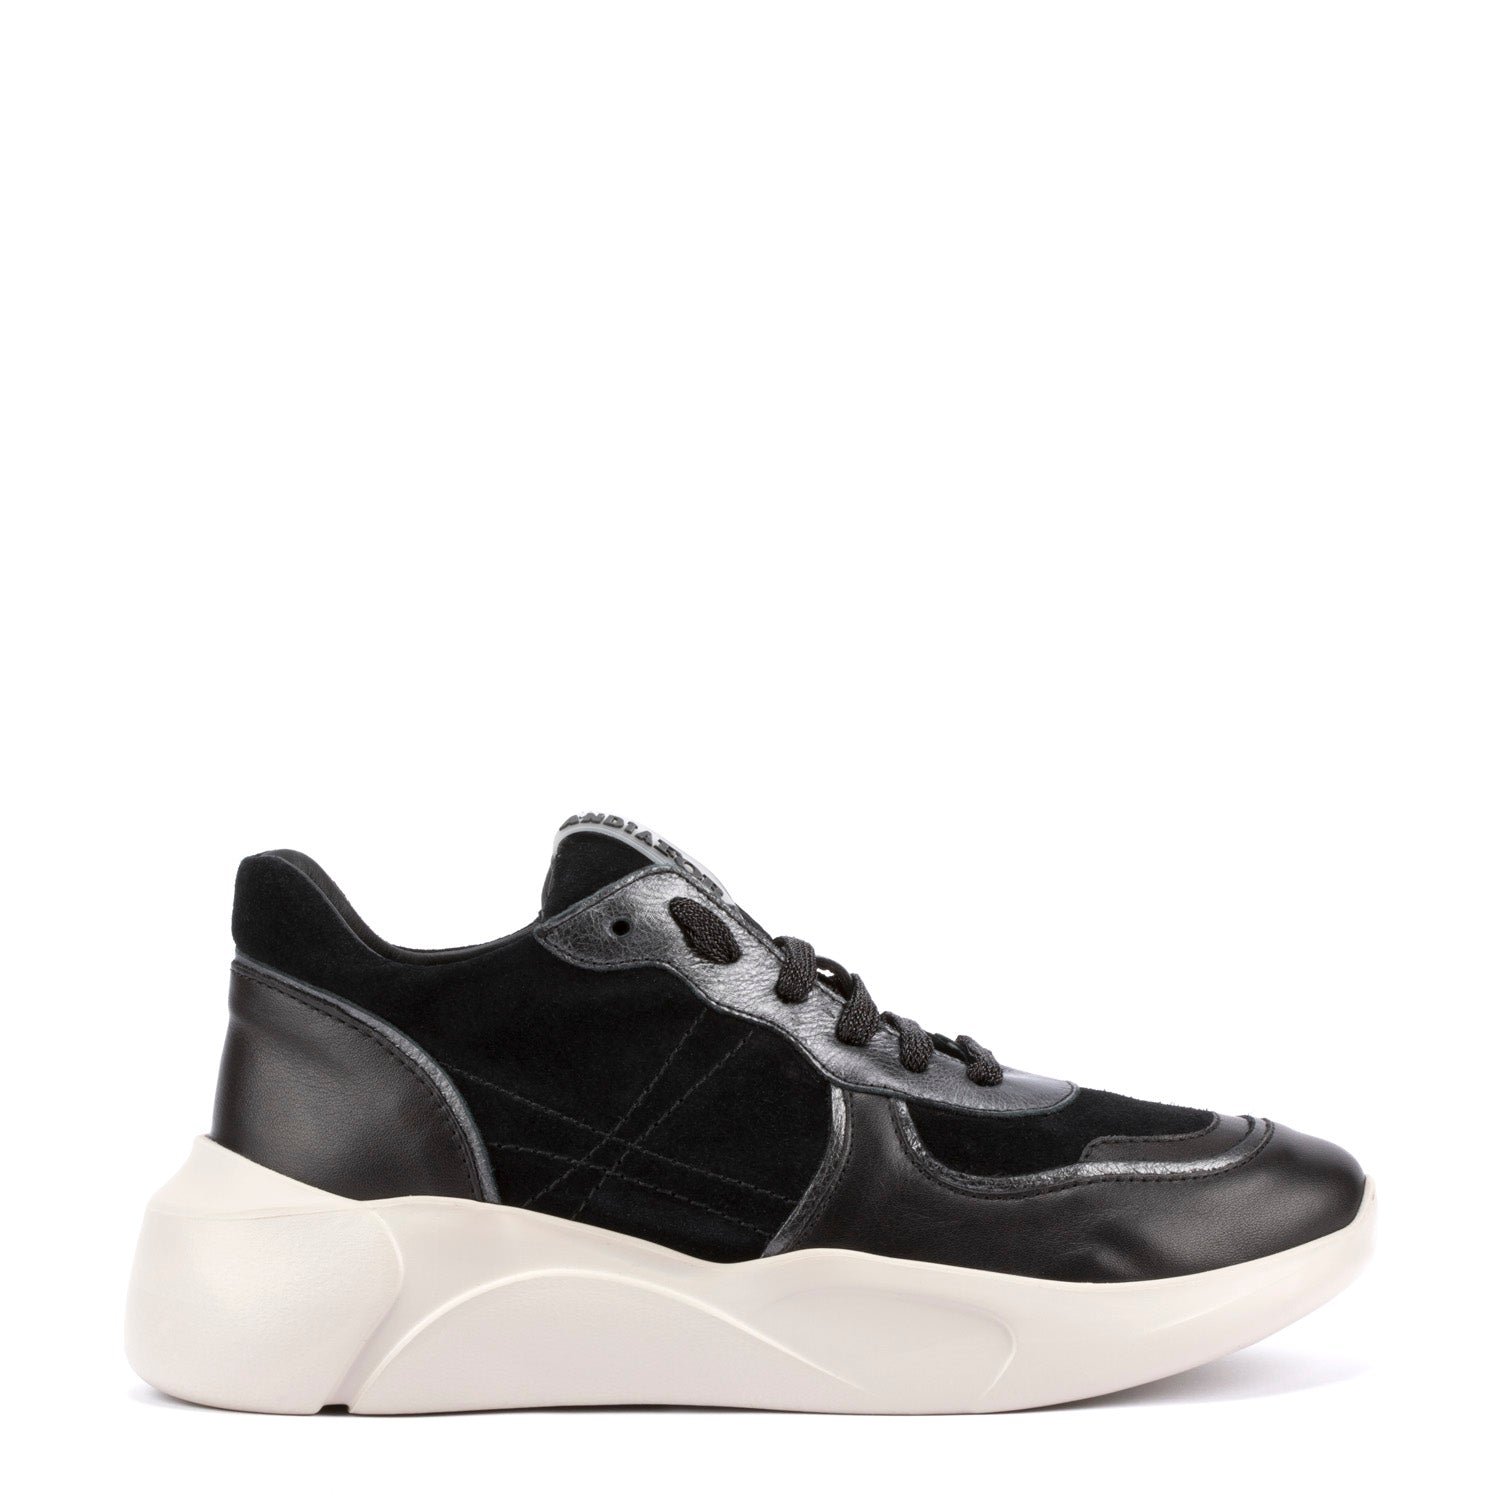 Andia Fora Sneakers Andia Fora Spike Suede and Leather Sneakers